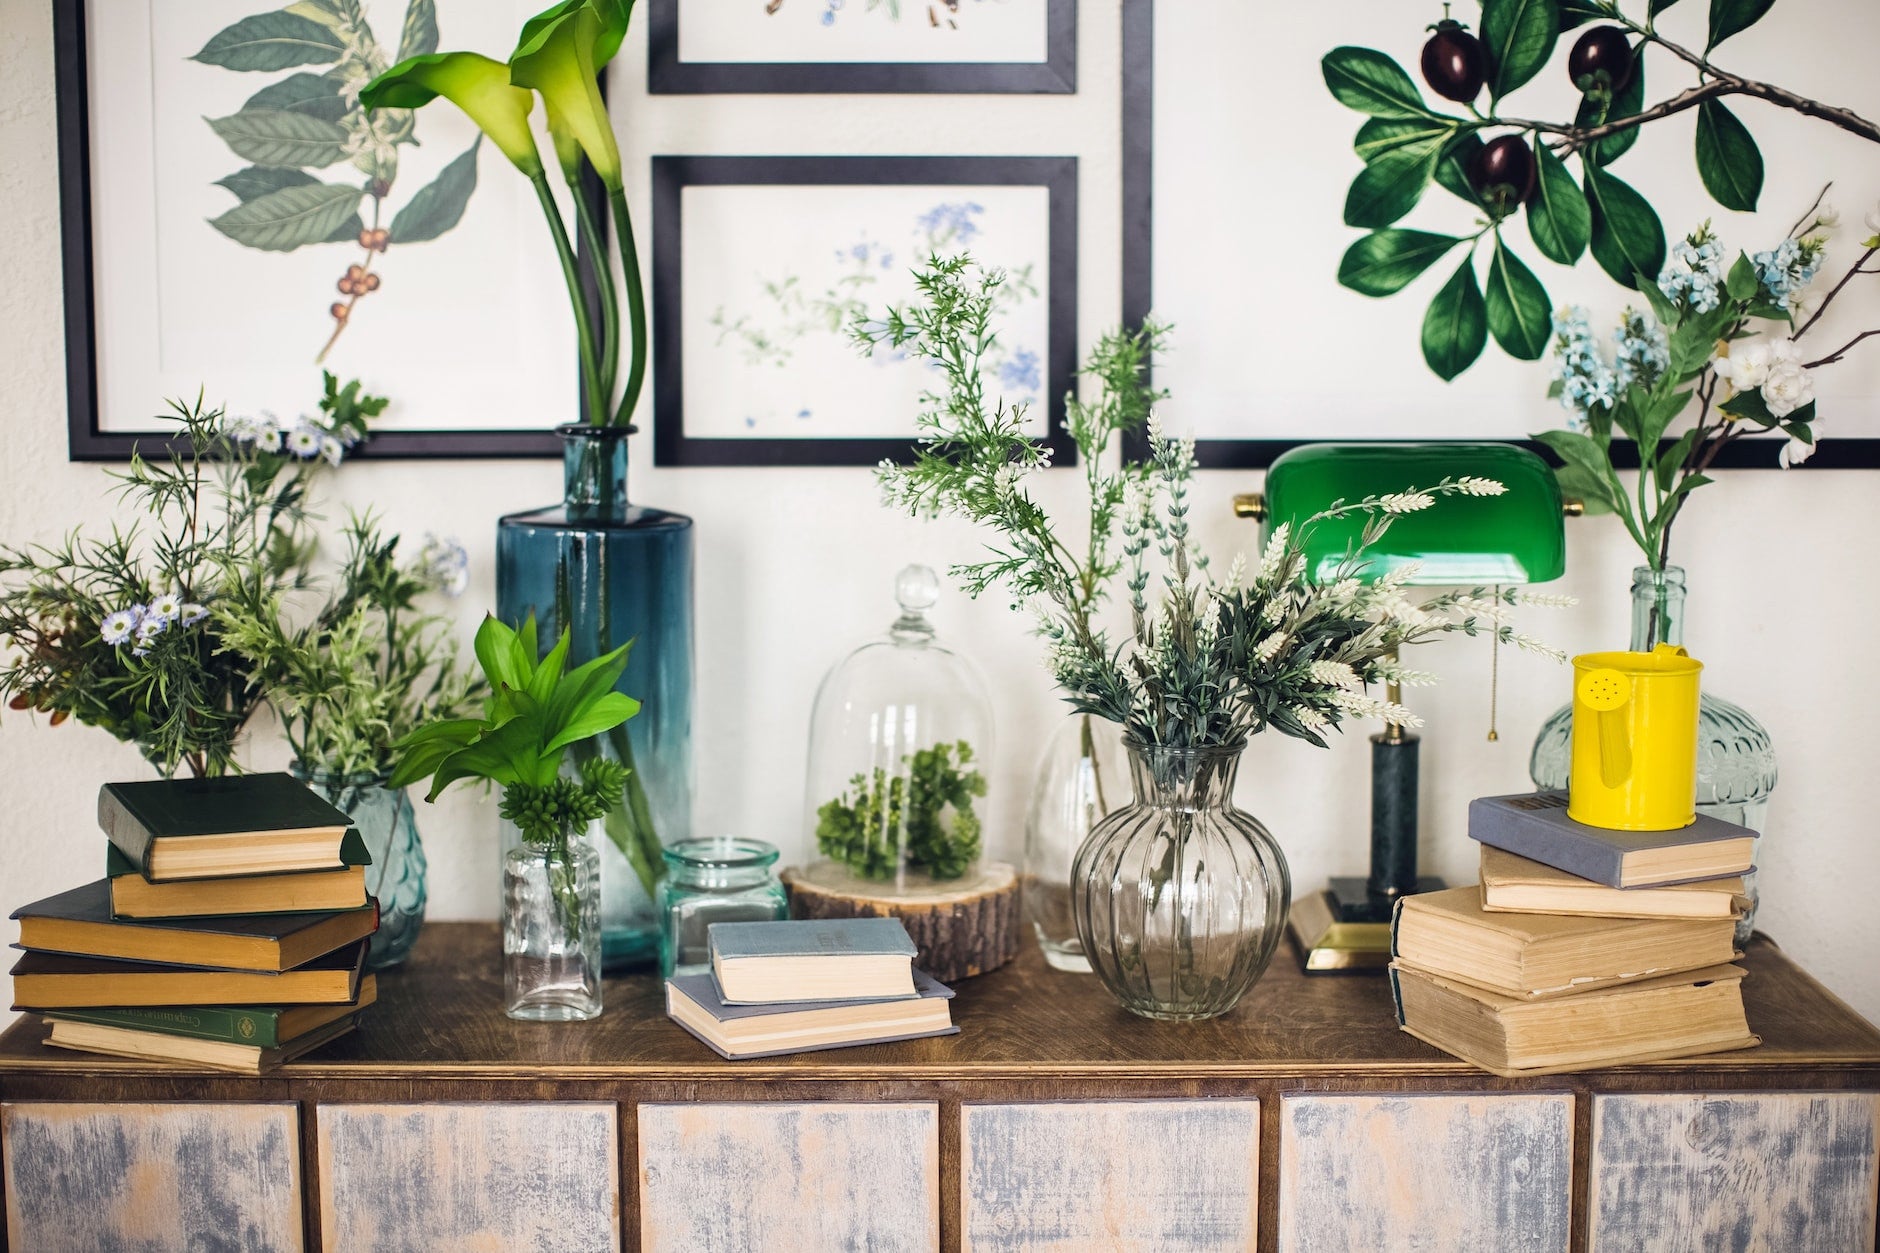 Master the Art of Display - Learn how to Turn Heads with Your Decor